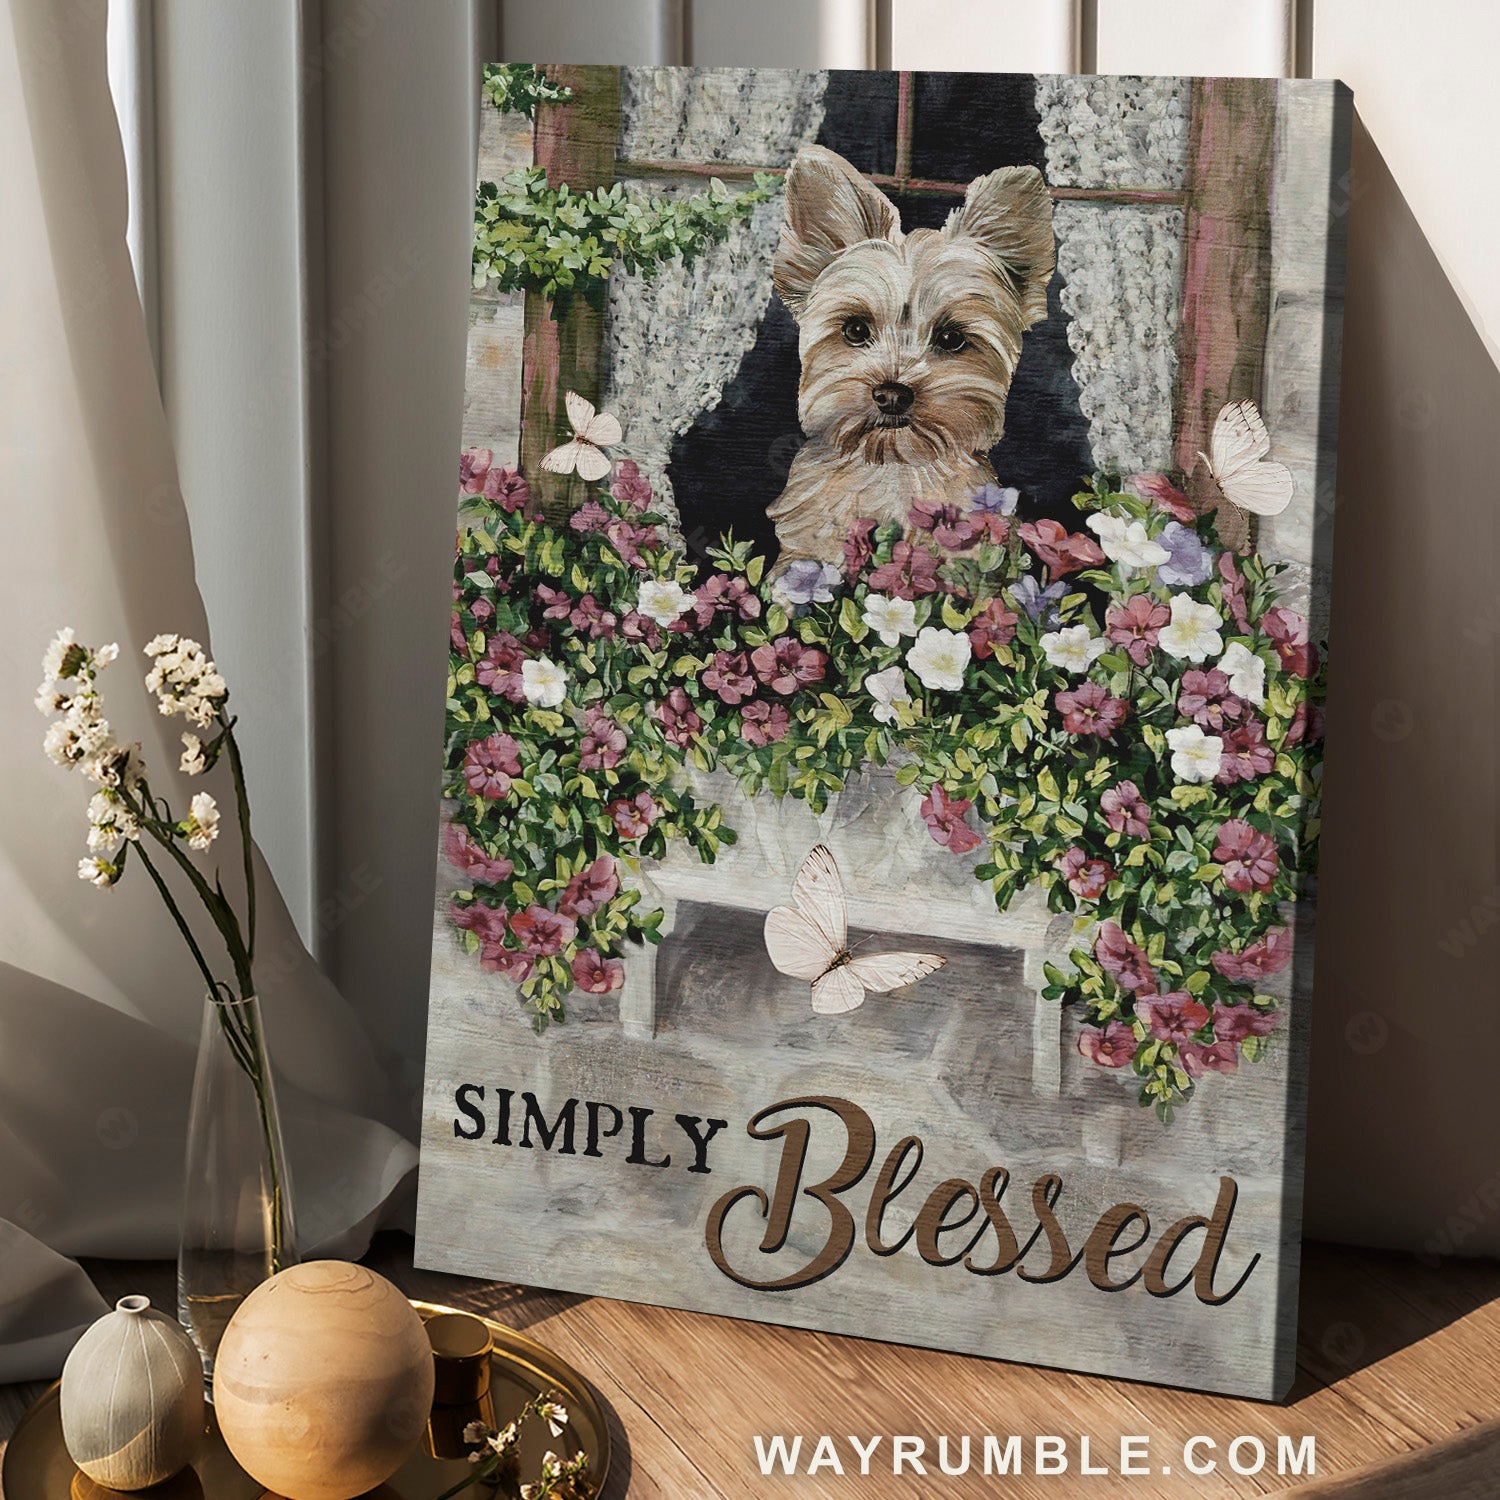 Yorkshire Terrier dog, Beautiful flower garden, Butterfly, Simply blessed - Jesus Portrait Canvas Prints, Christian Wall Art